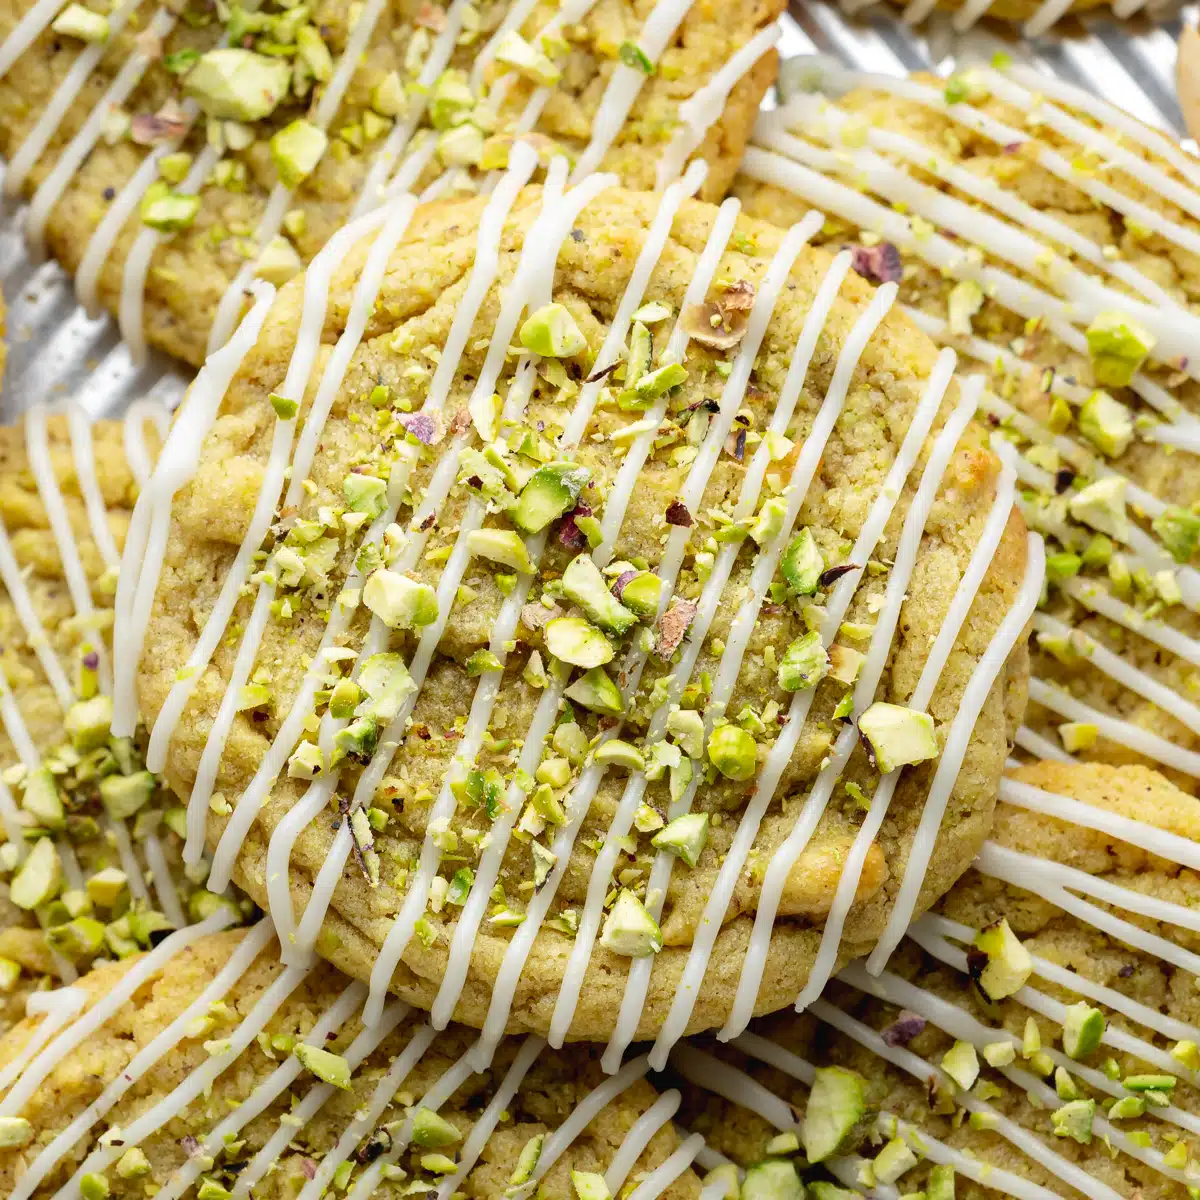 pistachio cookies with icing drizzled across them.